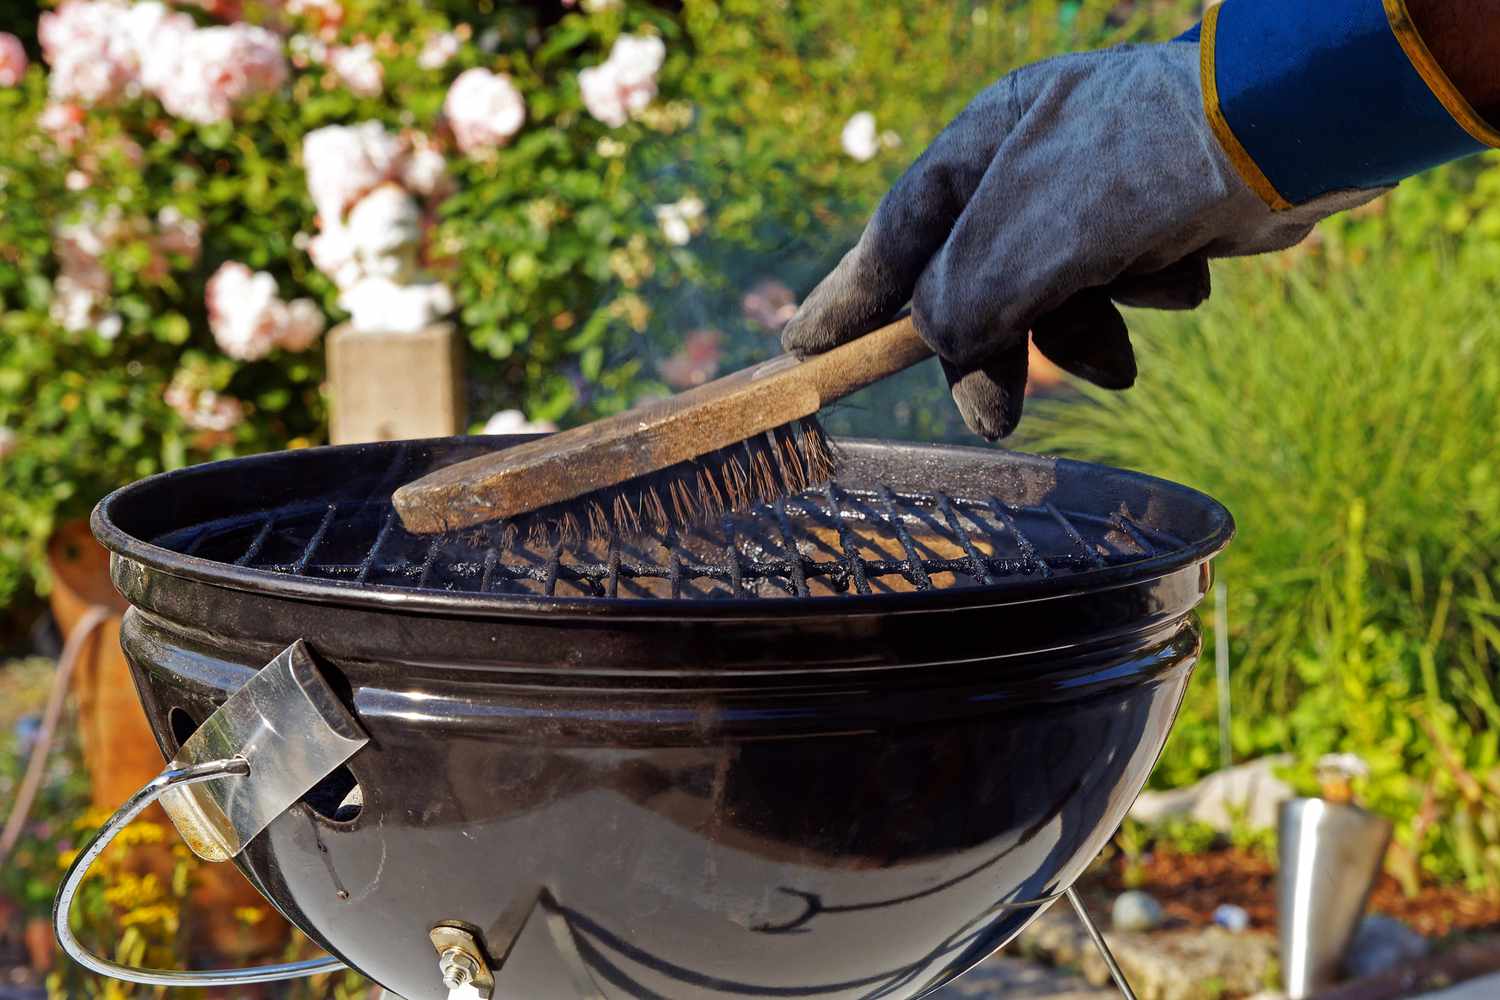 The Best Way To Clean A Grill For Delicious Backyard BBQ